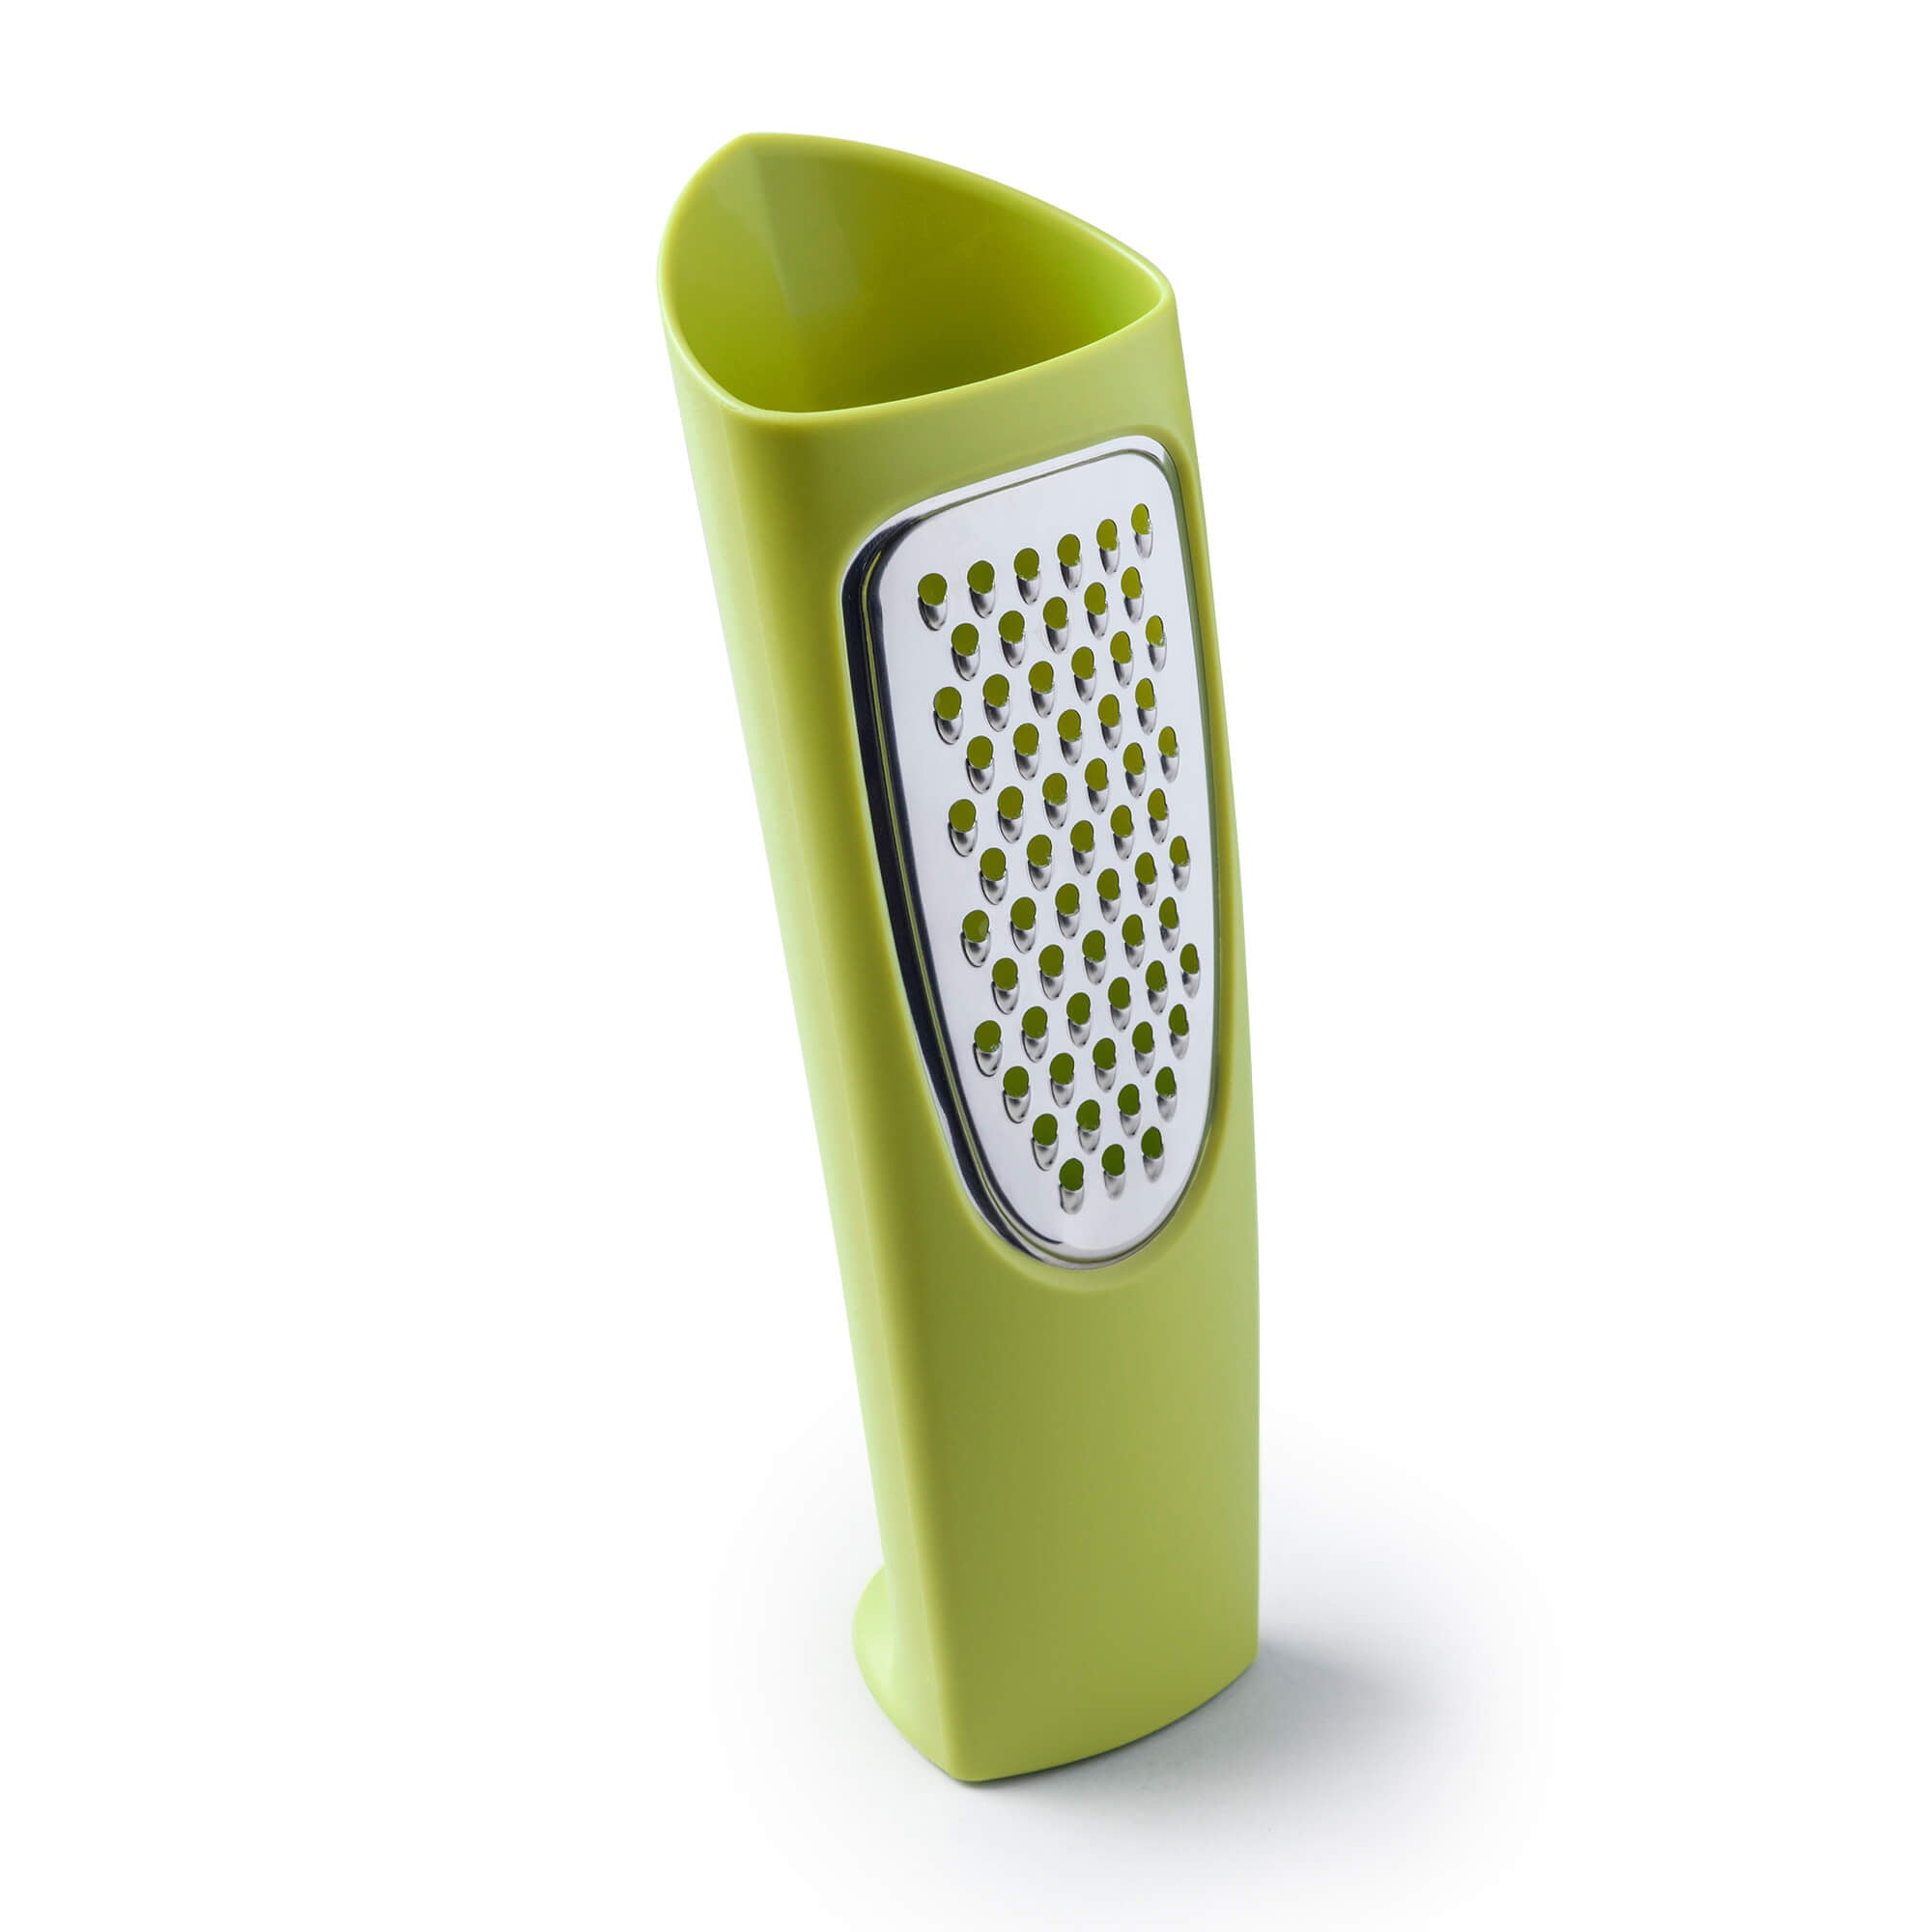 Grate and Serve Tower Grater